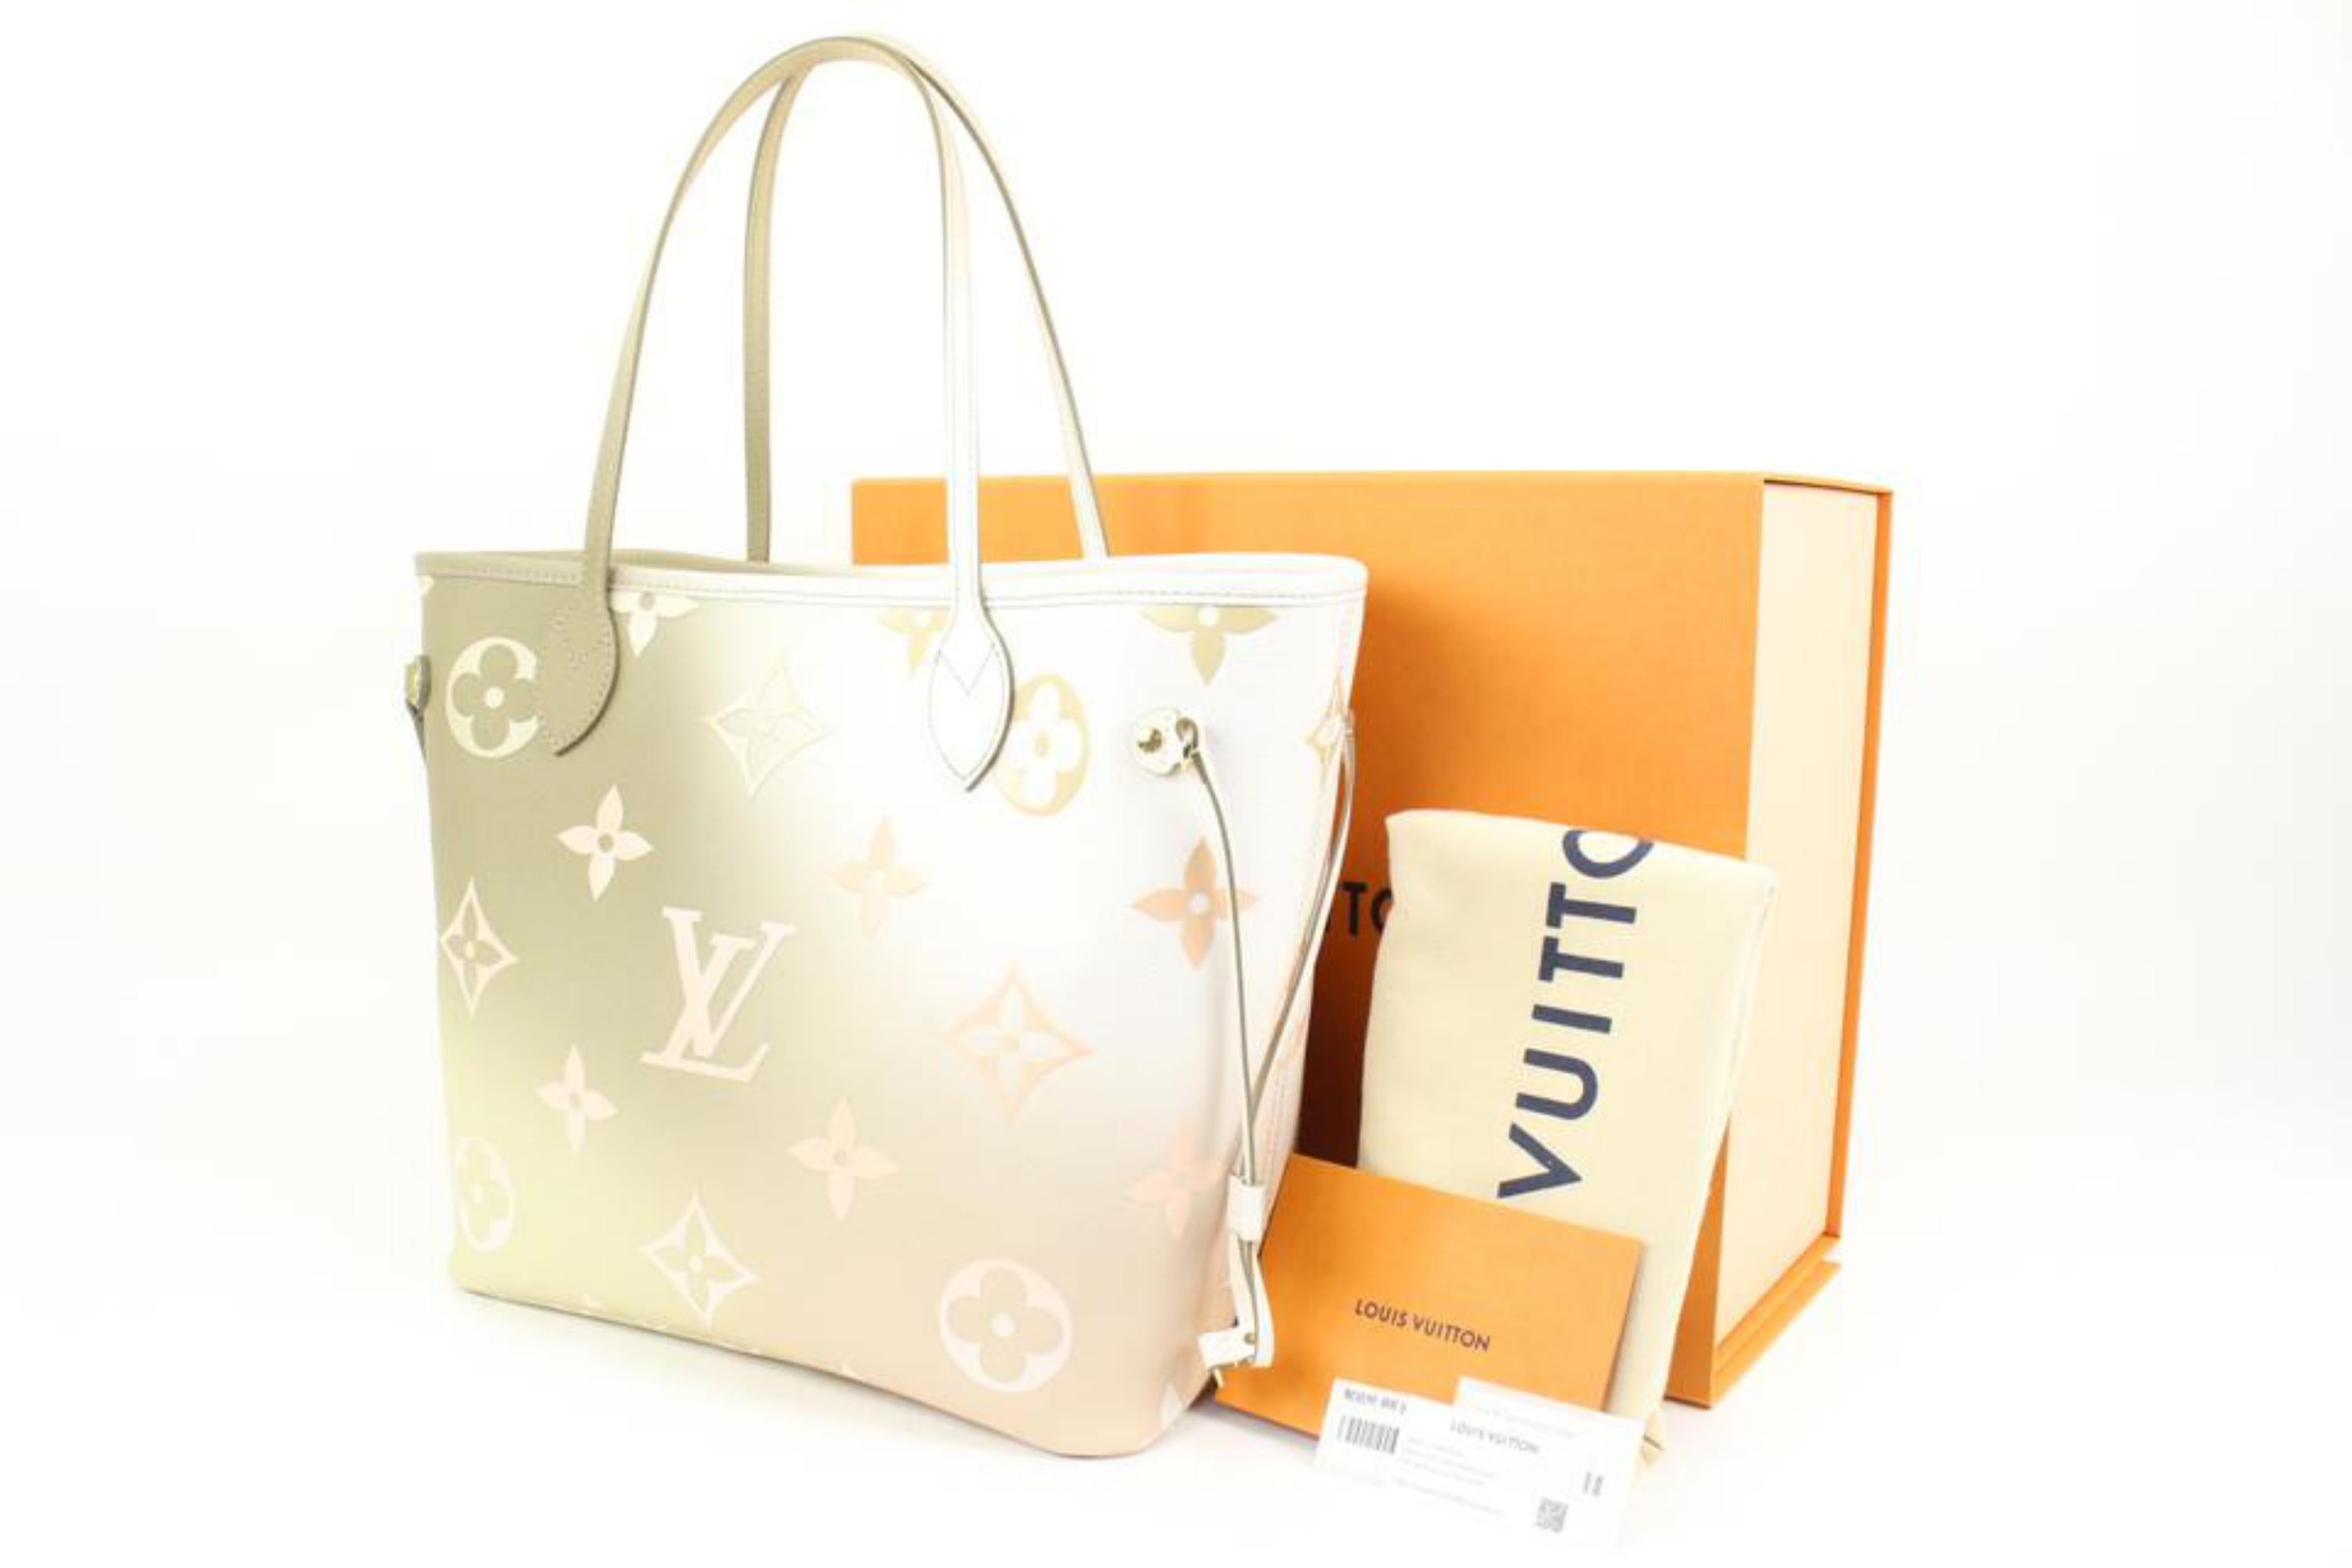 Louis Vuitton Monogram Sunset Khaki Neverfull MM Tote Bag 80lz418s
Date Code/Serial Number: RFID Chip
Made In: France
Measurements: Length:  18